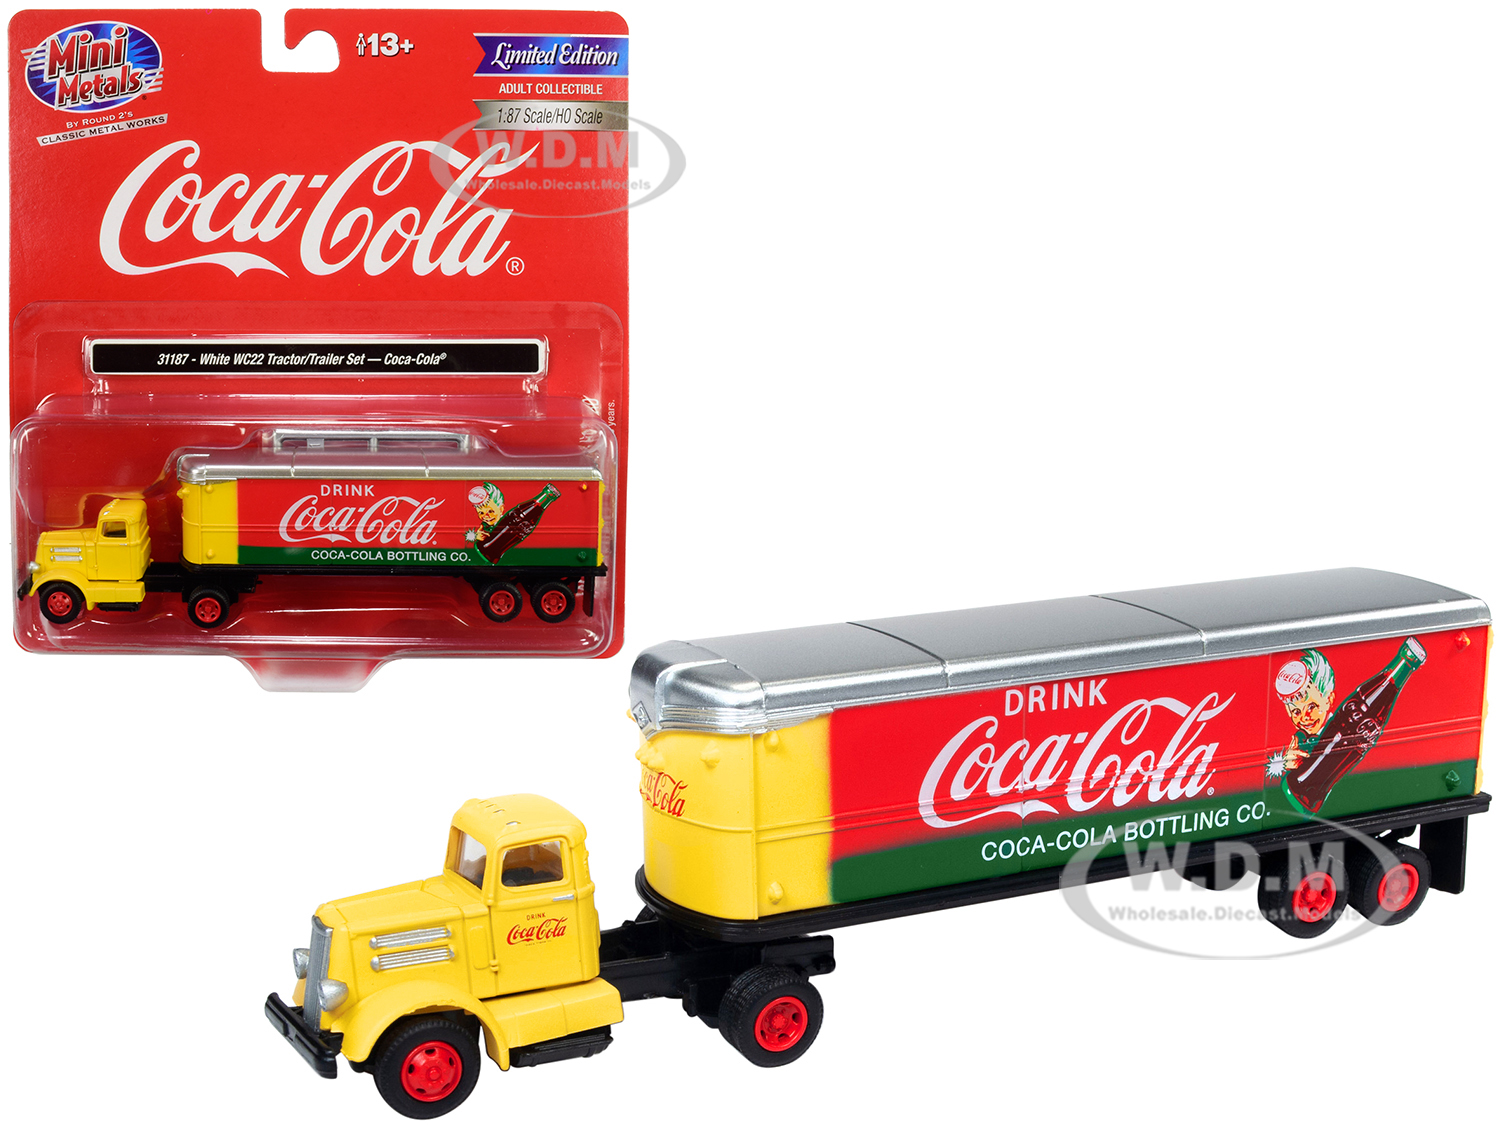 White Wc22 Tractor Trailer "coca-cola" Yellow And Red 1/87 (ho) Scale Model By Classic Metal Works